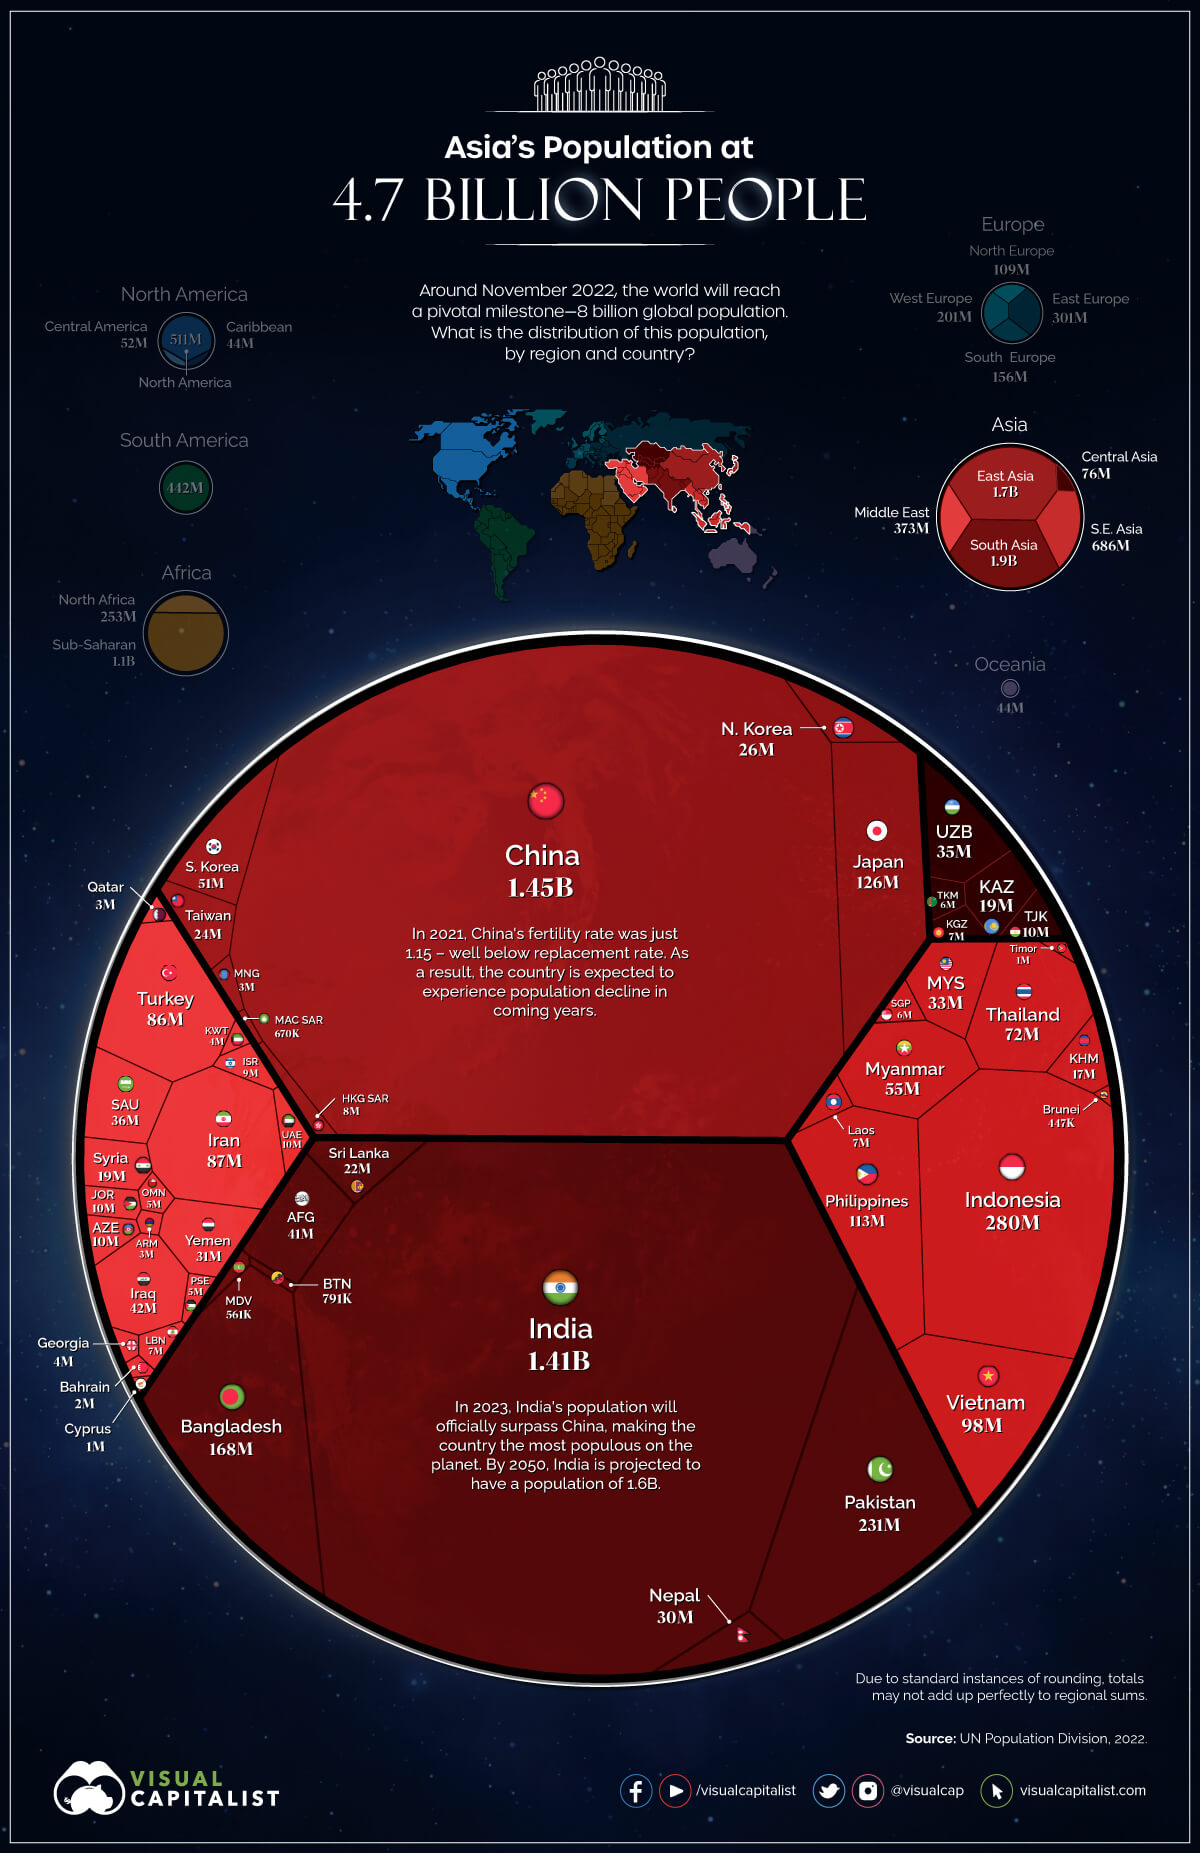 Visualized: The World's Population at 8 Billion, by Country